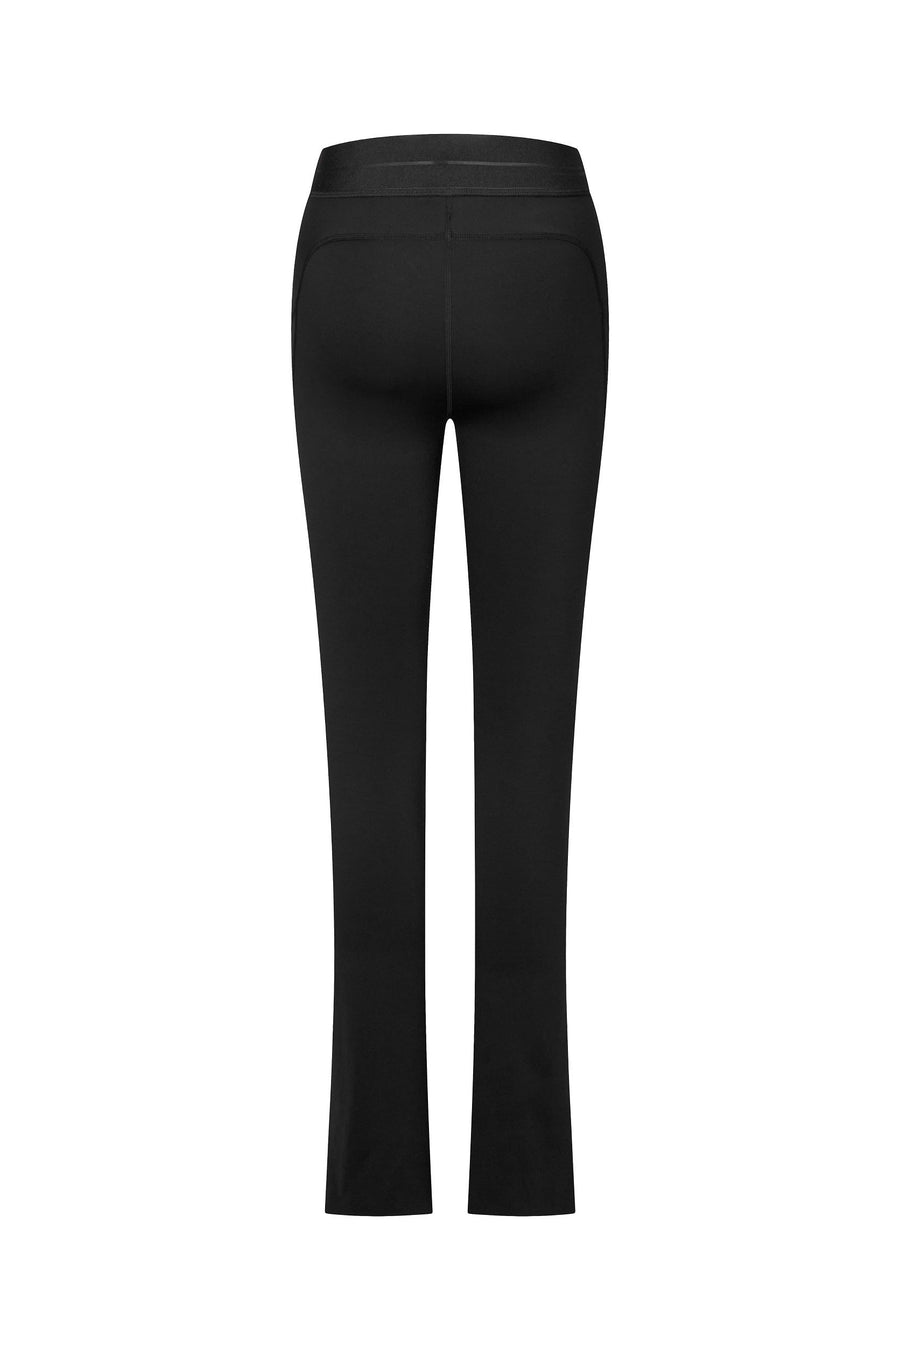 On The Move Front-Slit Leggings